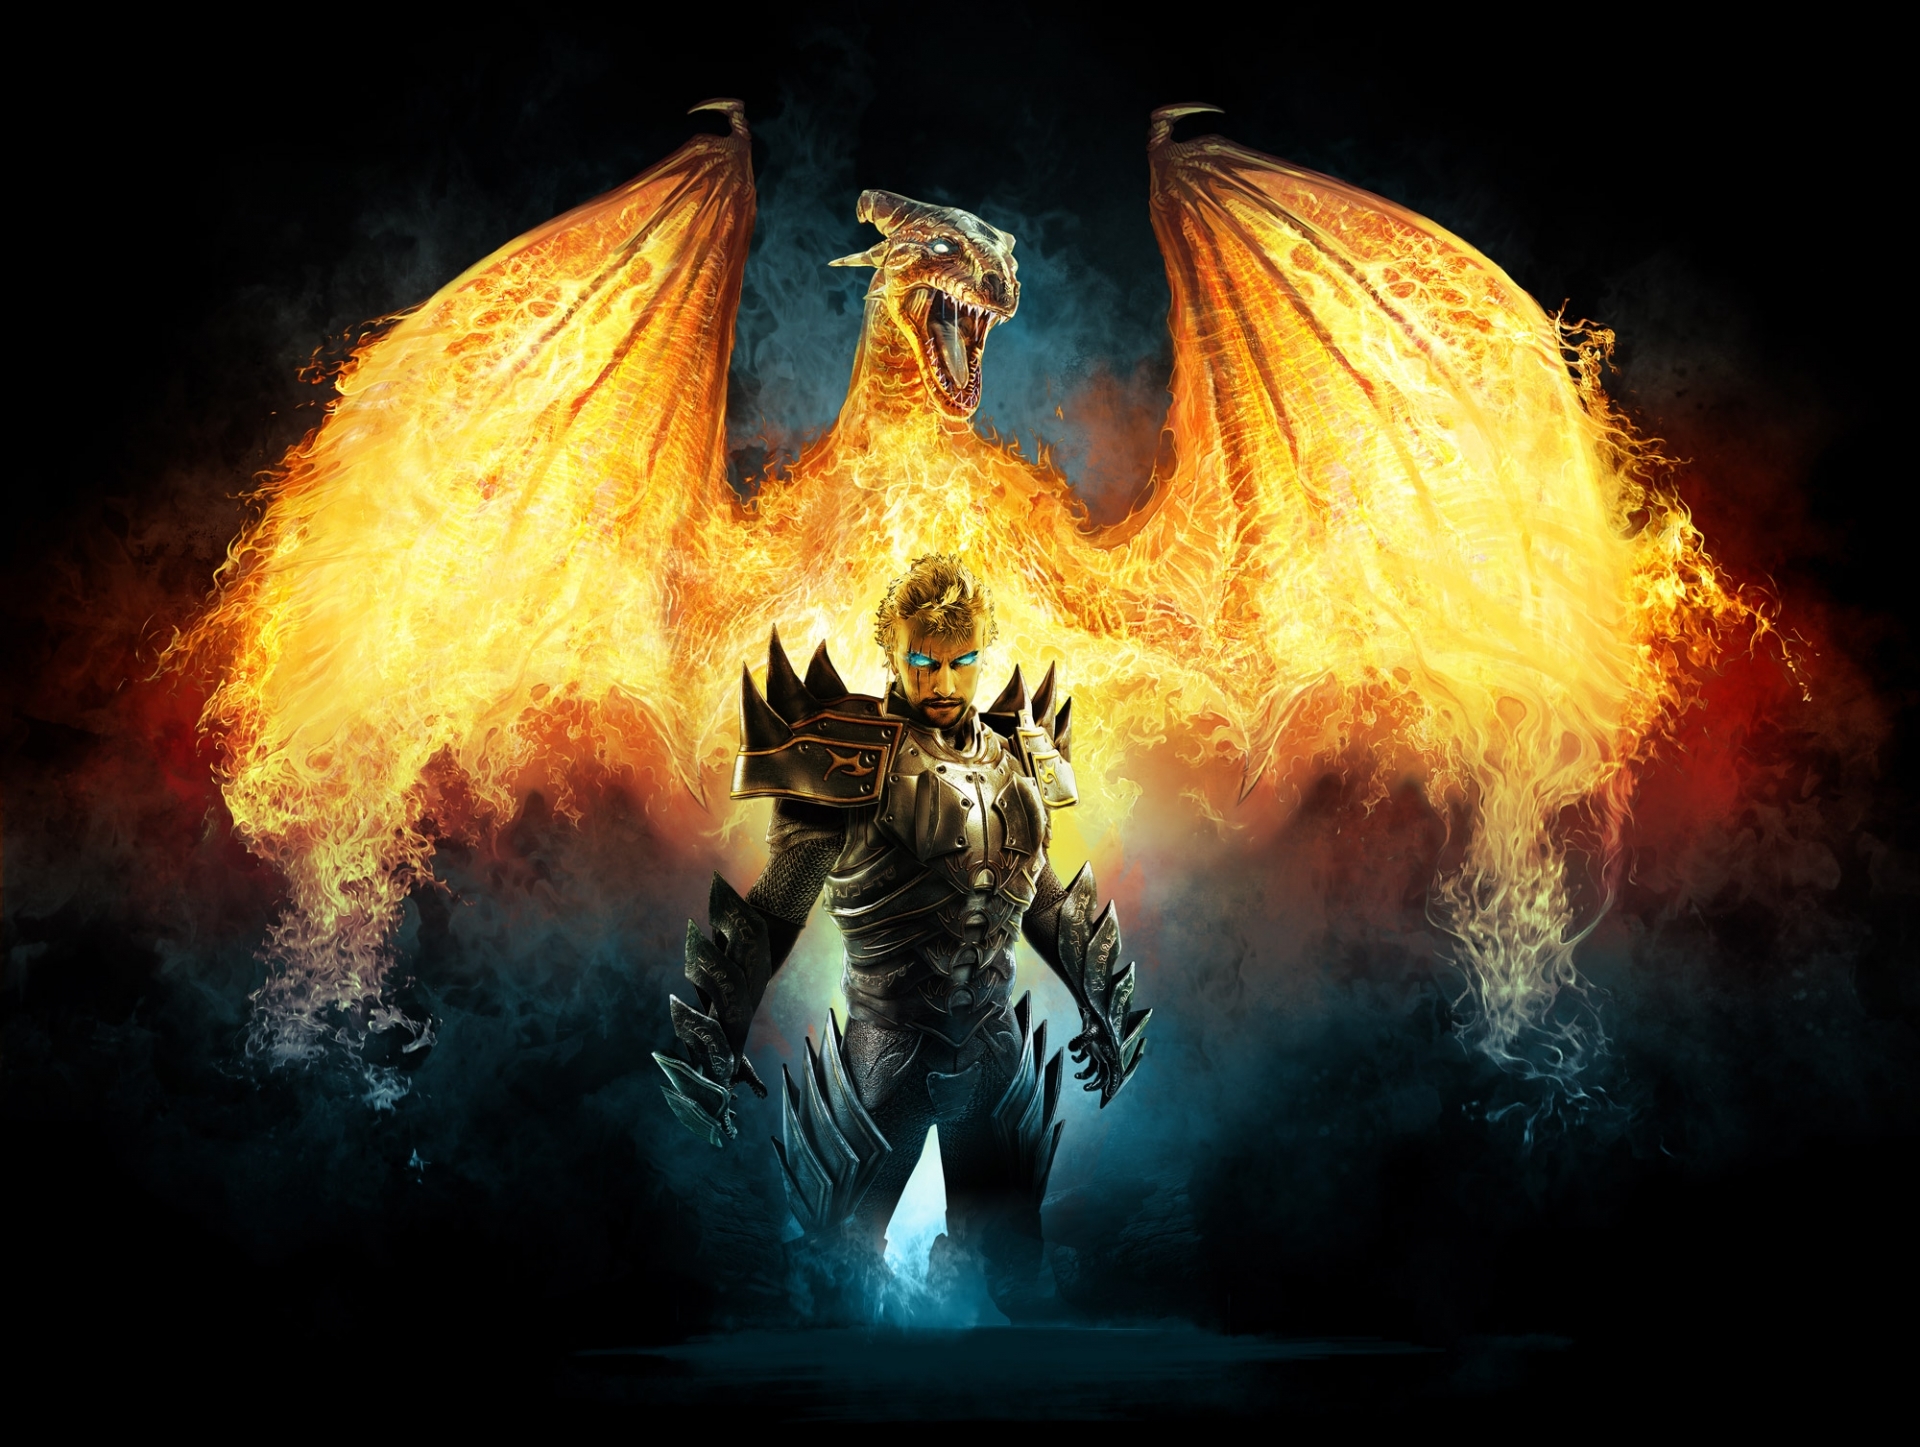 dragons, games, fire wallpapers for tablet